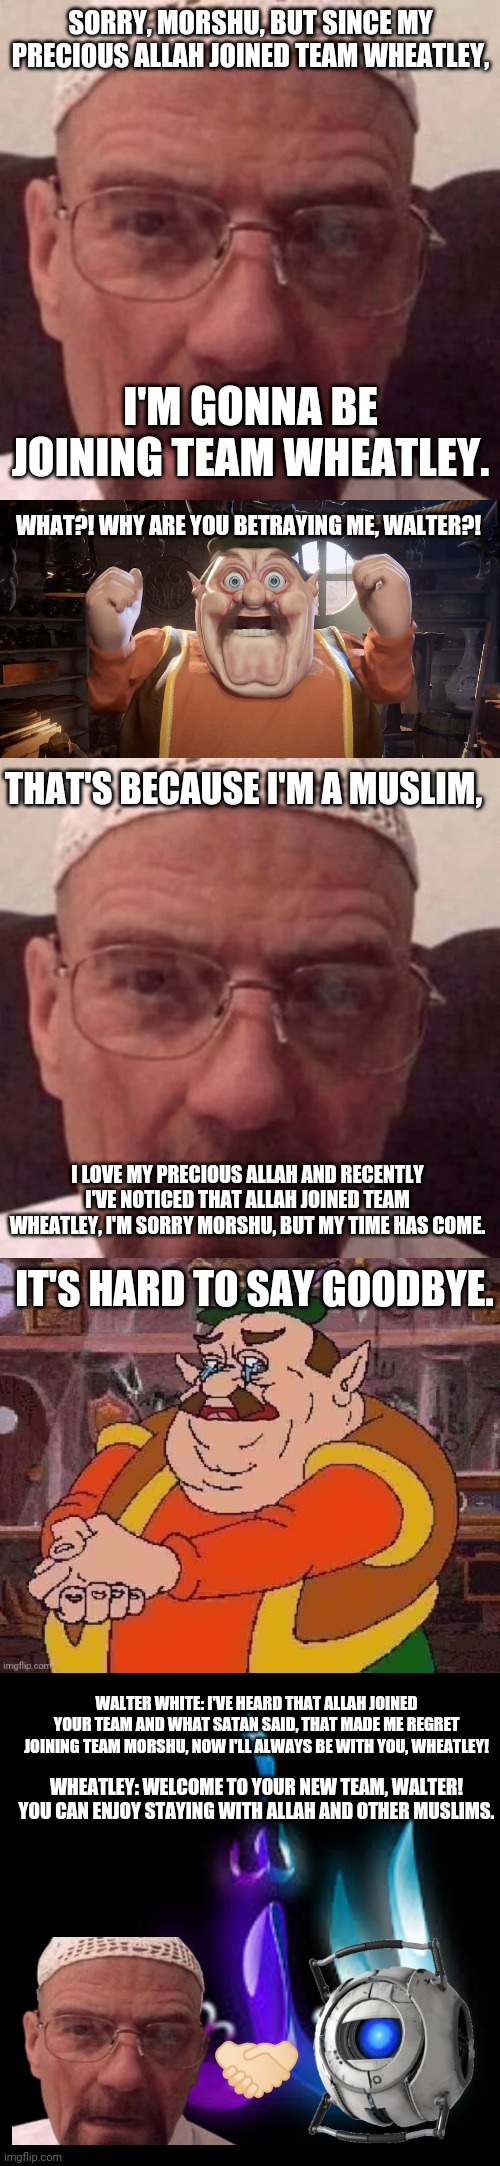 Walter White will forever be on Team Wheatley since Allah joined. Waltuh would NEVER say no to his precious Allah! | SORRY, MORSHU, BUT SINCE MY PRECIOUS ALLAH JOINED TEAM WHEATLEY, I'M GONNA BE JOINING TEAM WHEATLEY. WHAT?! WHY ARE YOU BETRAYING ME, WALTER?! THAT'S BECAUSE I'M A MUSLIM, I LOVE MY PRECIOUS ALLAH AND RECENTLY I'VE NOTICED THAT ALLAH JOINED TEAM WHEATLEY, I'M SORRY MORSHU, BUT MY TIME HAS COME. IT'S HARD TO SAY GOODBYE. WALTER WHITE: I'VE HEARD THAT ALLAH JOINED YOUR TEAM AND WHAT SATAN SAID, THAT MADE ME REGRET JOINING TEAM MORSHU, NOW I'LL ALWAYS BE WITH YOU, WHEATLEY! WHEATLEY: WELCOME TO YOUR NEW TEAM, WALTER! YOU CAN ENJOY STAYING WITH ALLAH AND OTHER MUSLIMS. 🤝🏻 | image tagged in morshu shocked | made w/ Imgflip meme maker